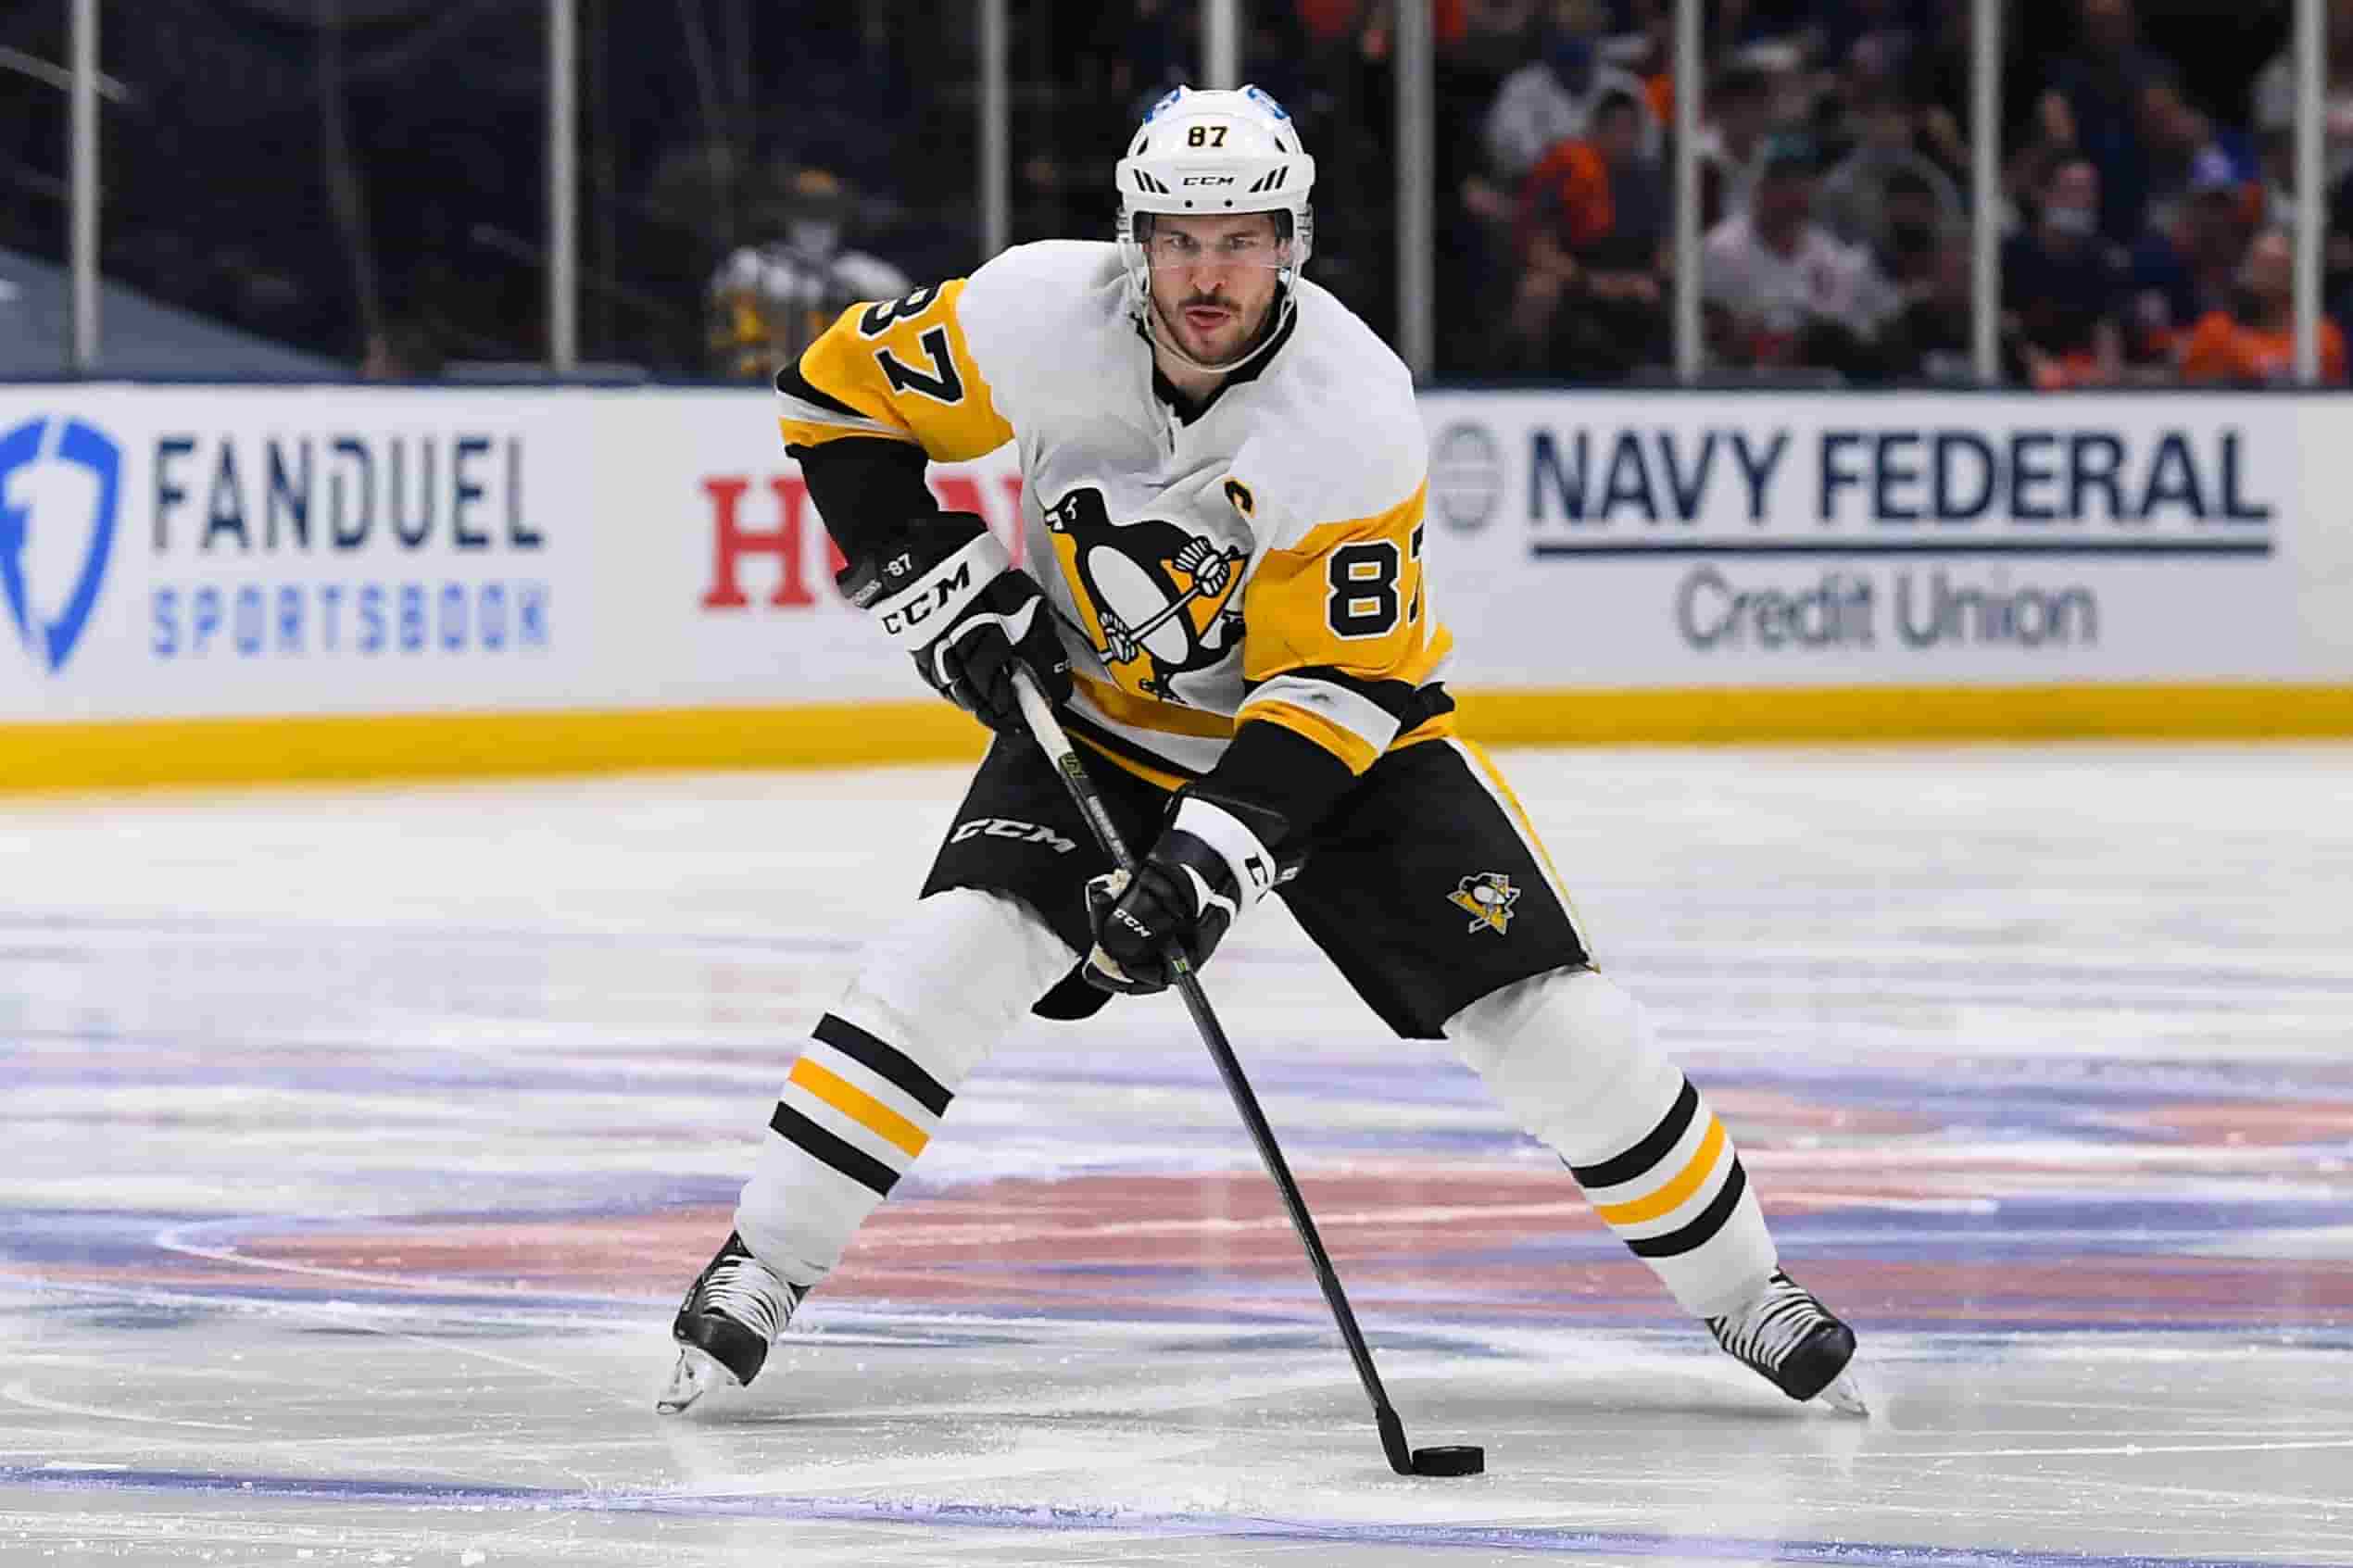 Image of Sidney Crosby as a professional hockey player